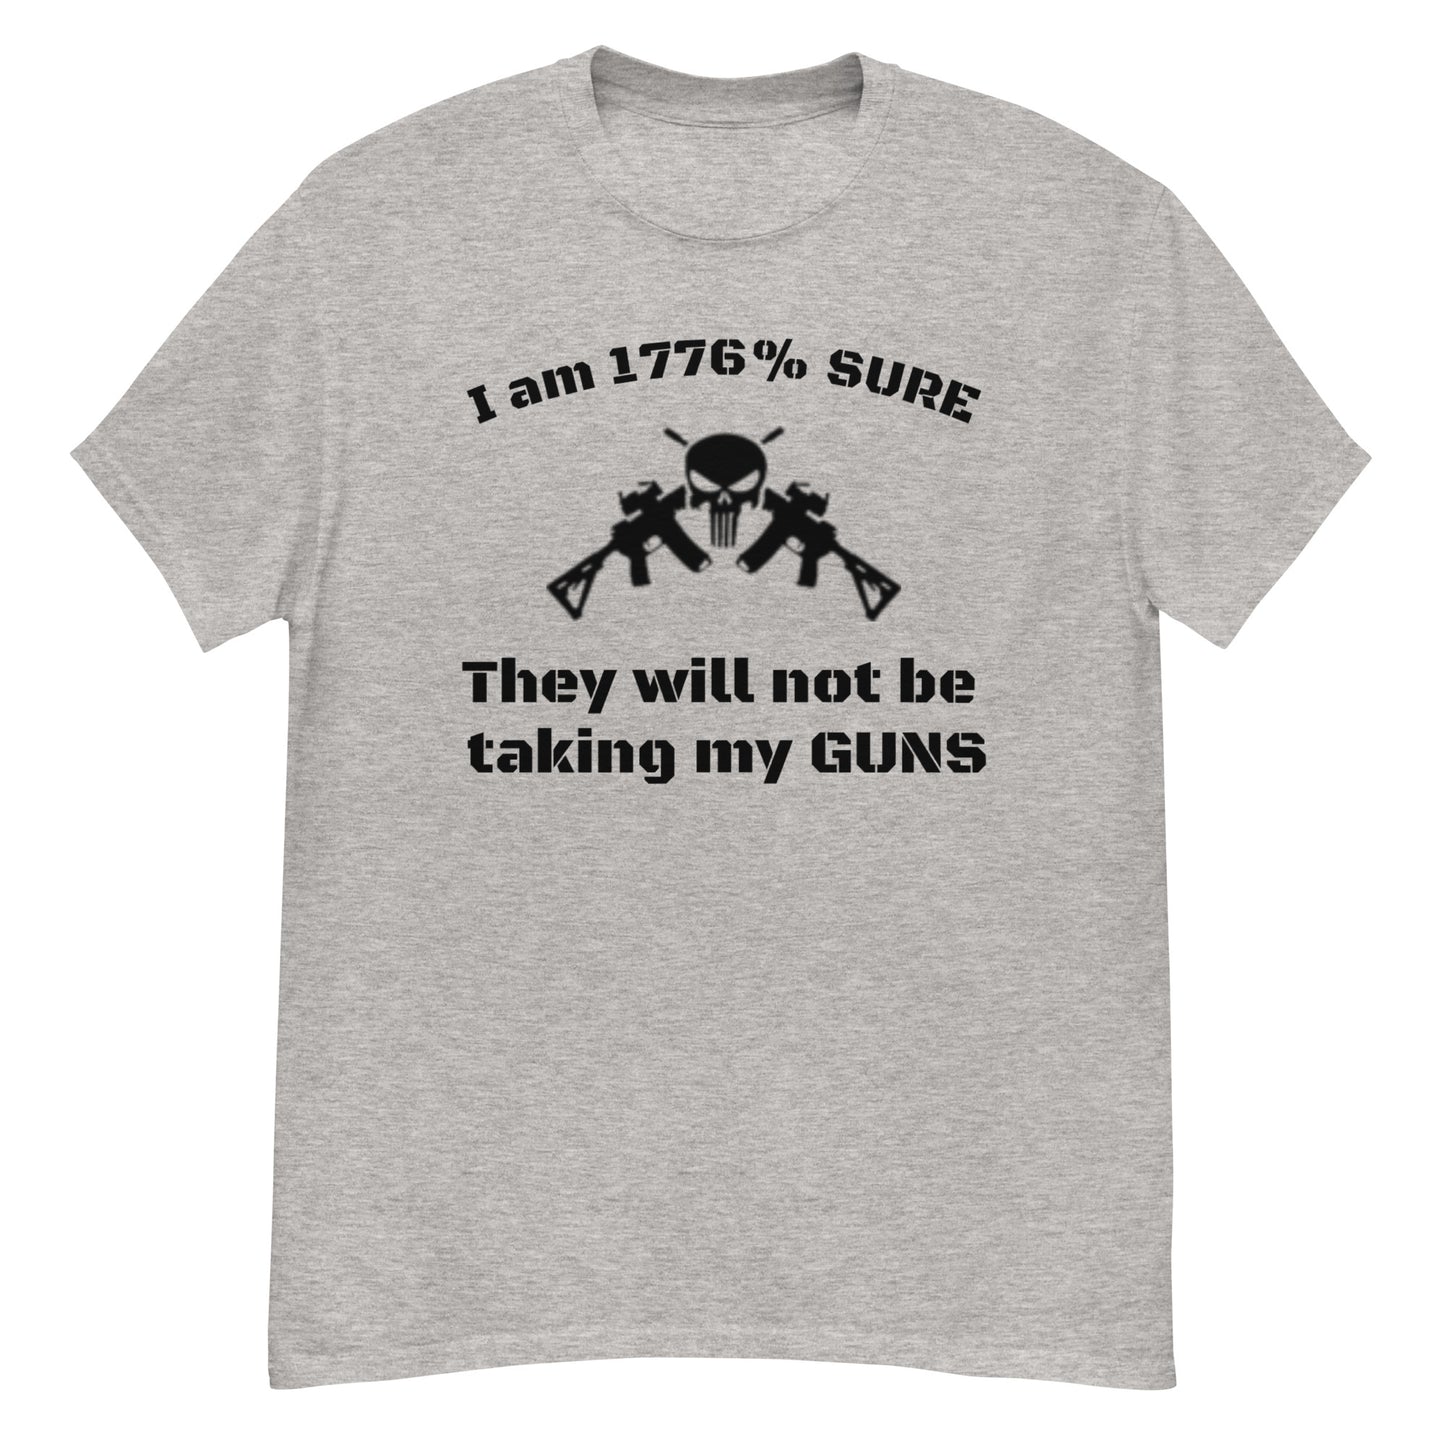 I am 1776% Sure they will not be taking my guns Punisher Men's classic tee